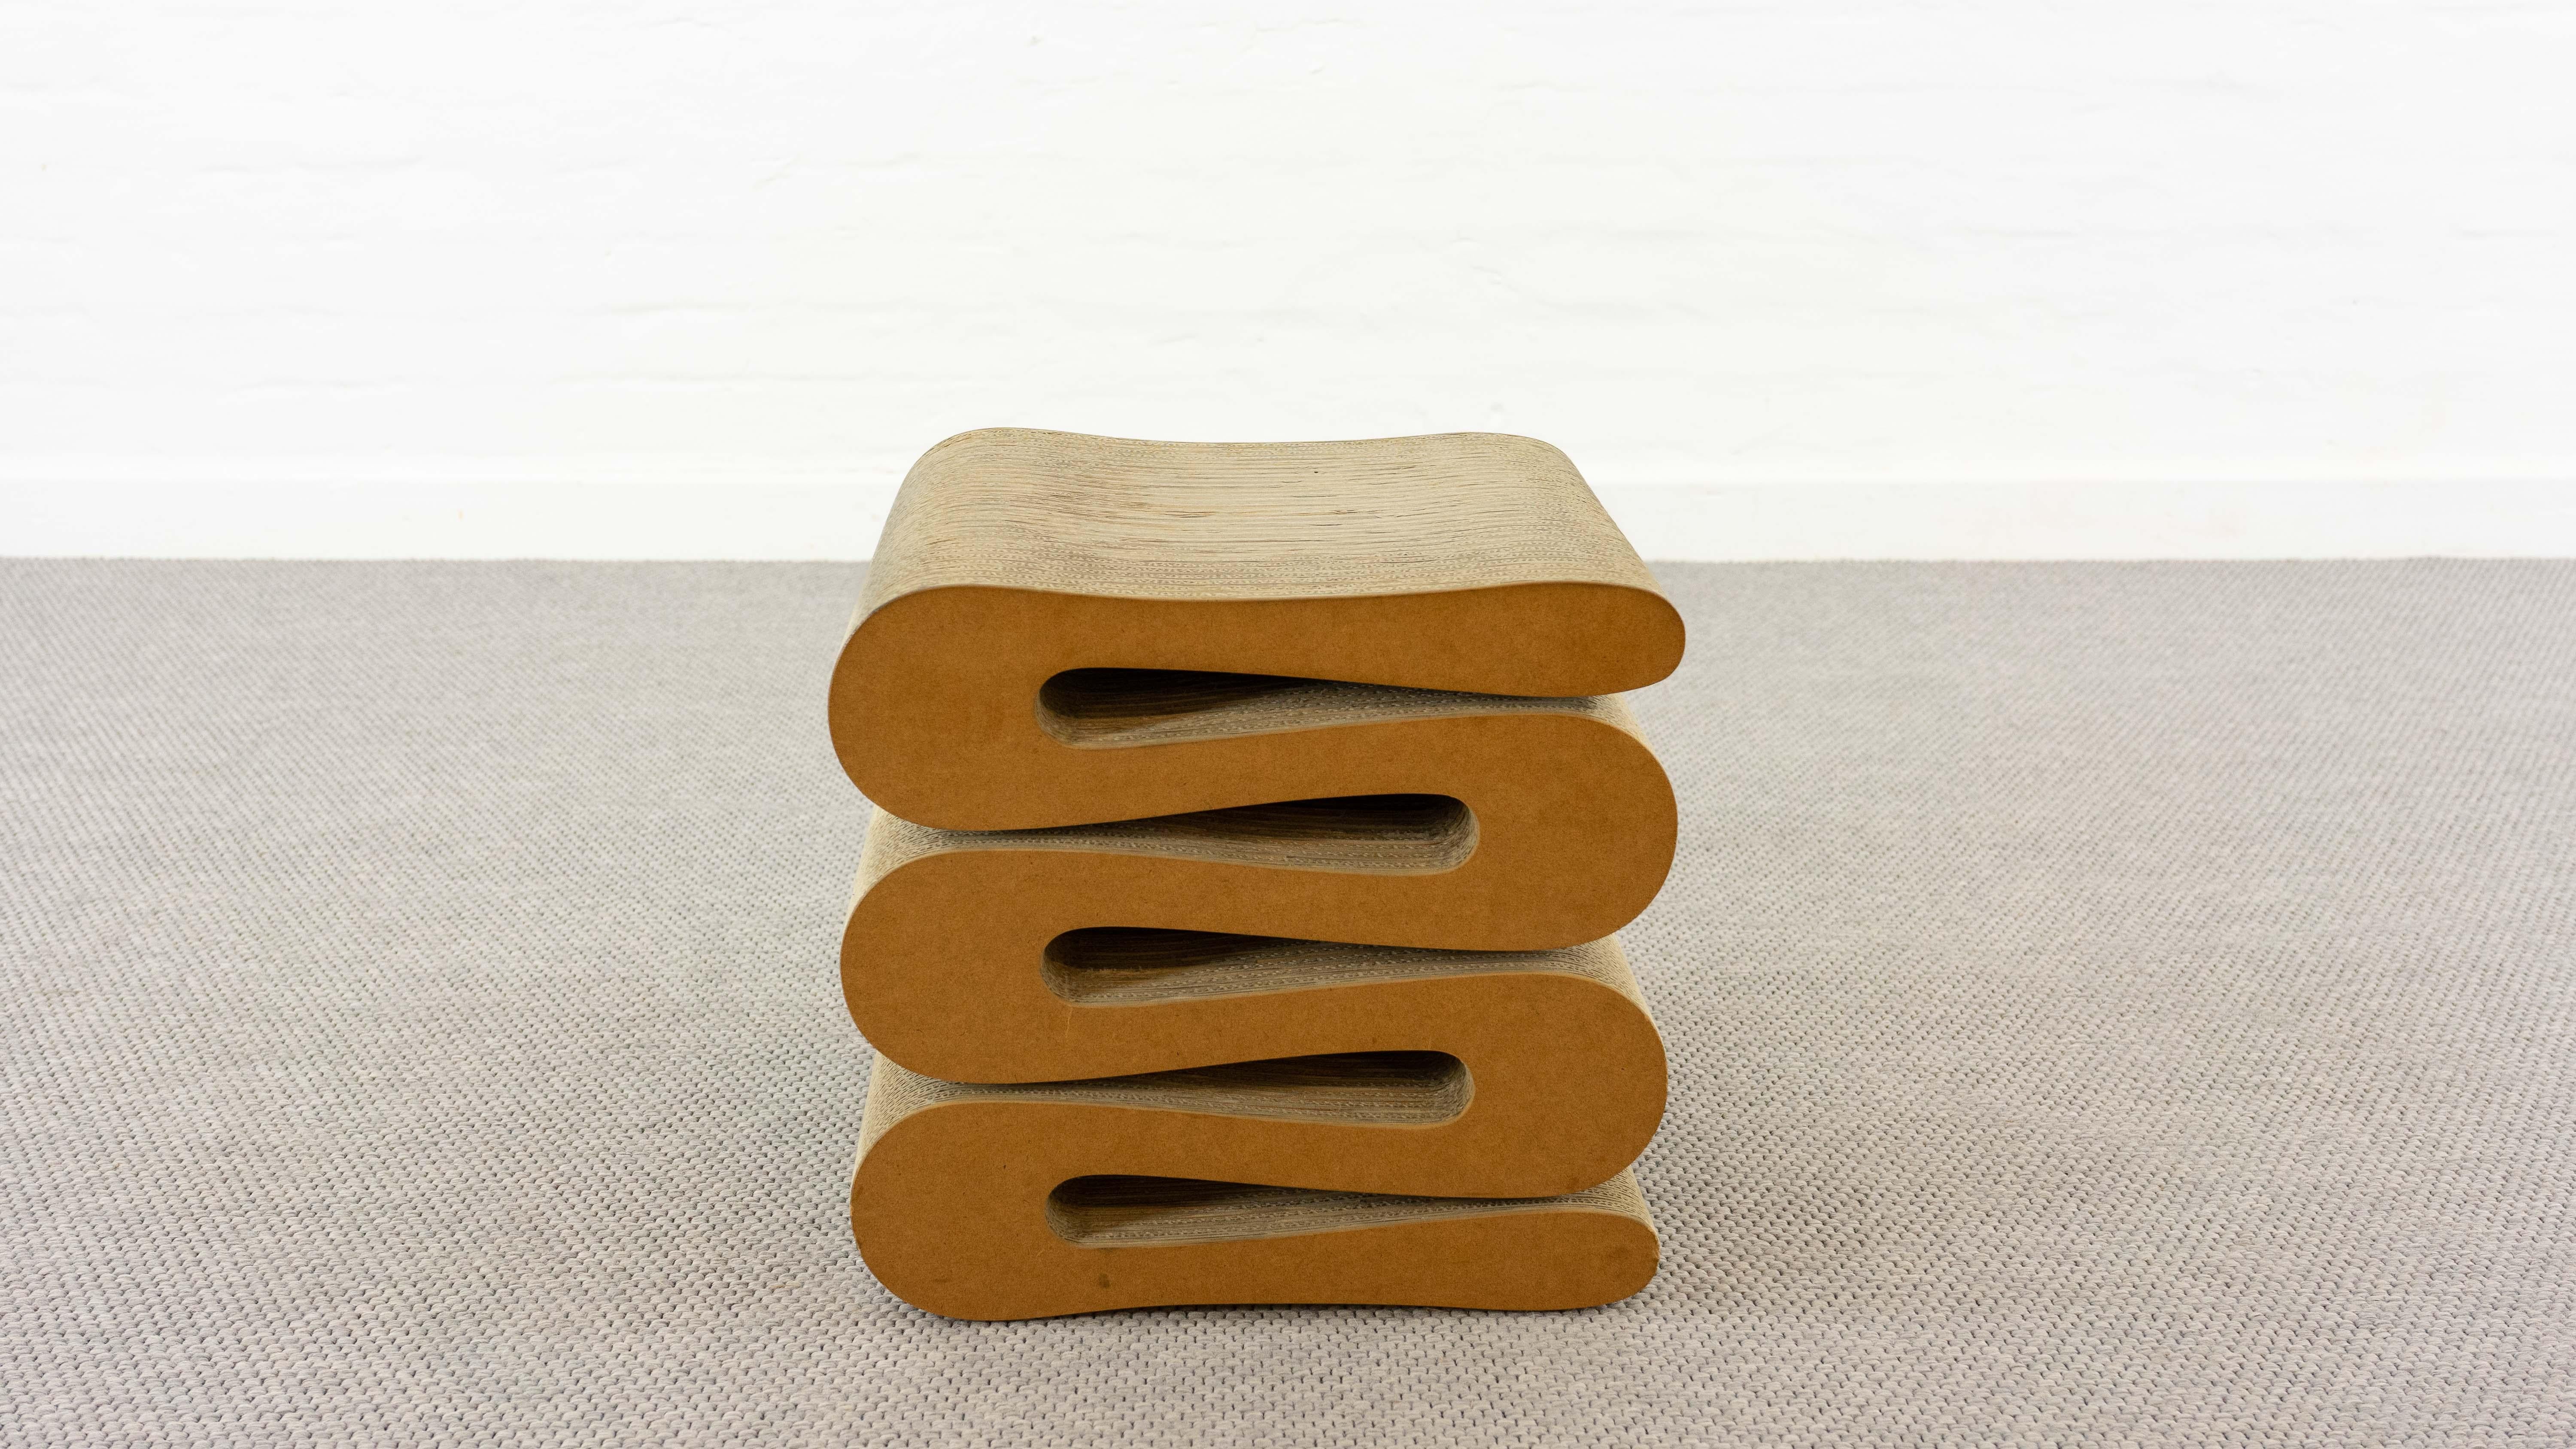 Vintage wiggle stool by famous architect Frank O. Gehry. Manufactured by Vitra. The piece is made of corrugated cardboard and hardboard to the edges. Labelled on downside. The other stool and wiggle chair which are shown are not part of this offer.